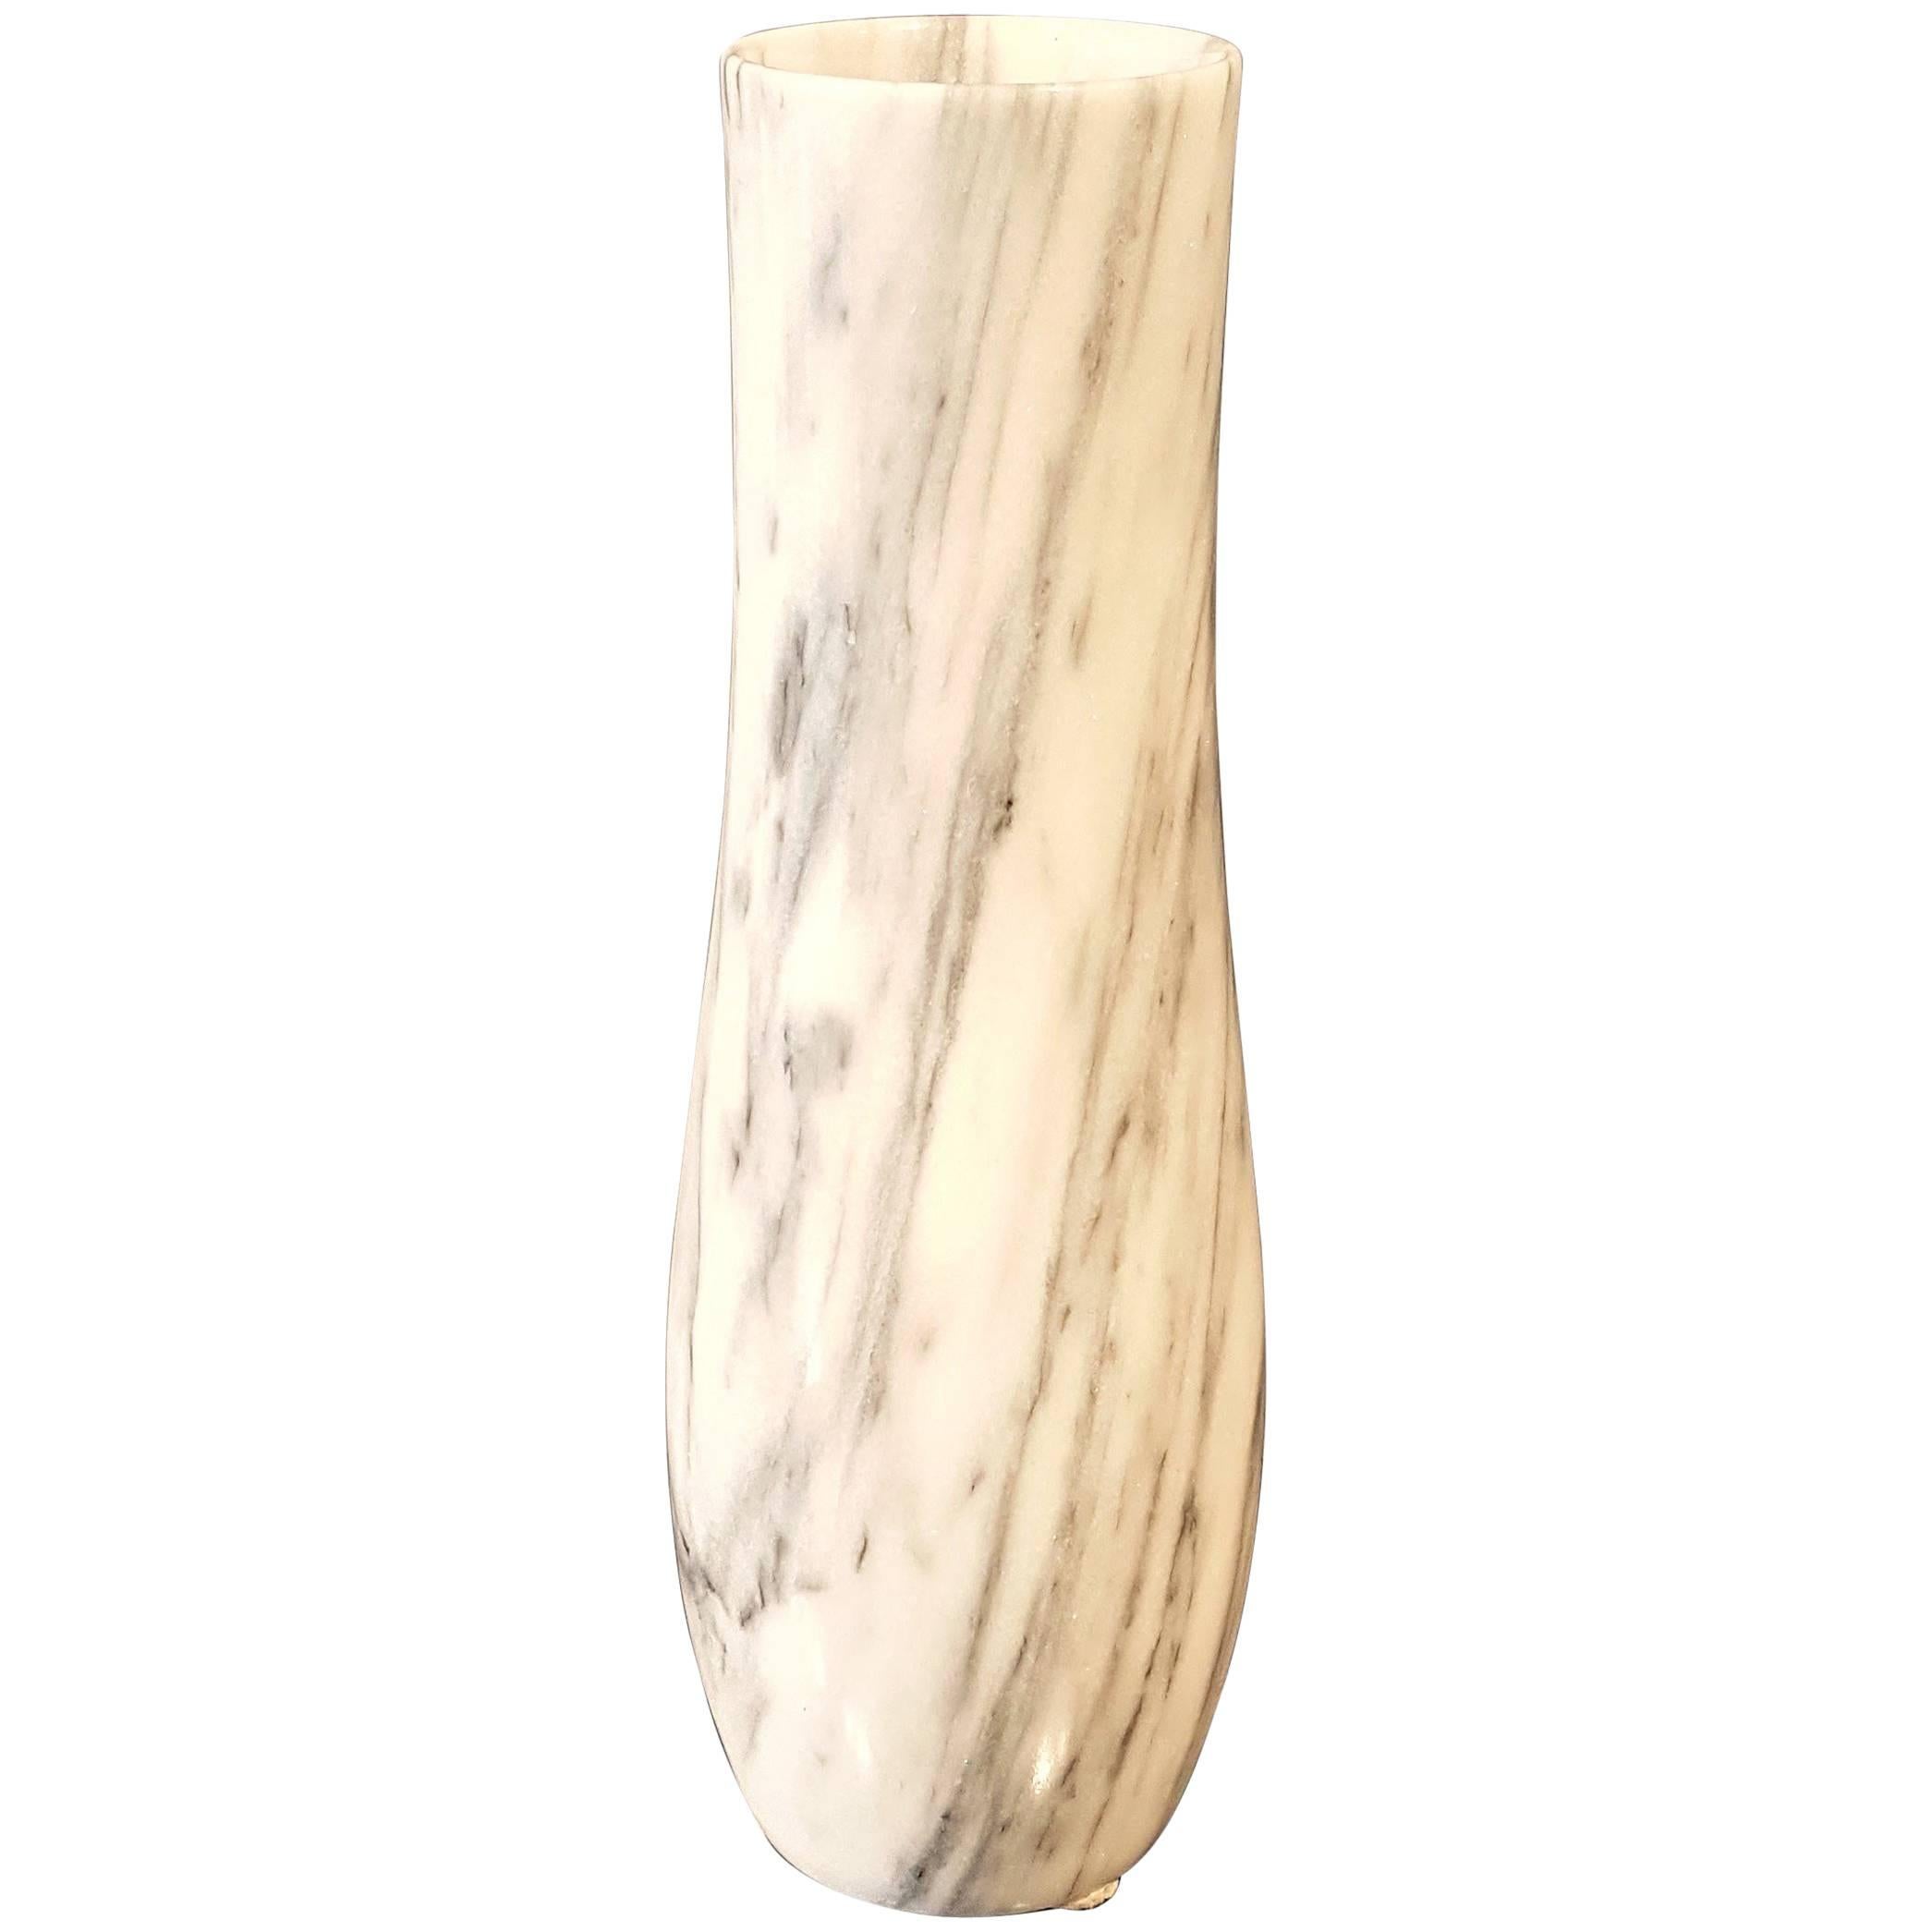 Massive Carrara Marble Vase with Dramatic Striations, Italy 1950s For Sale